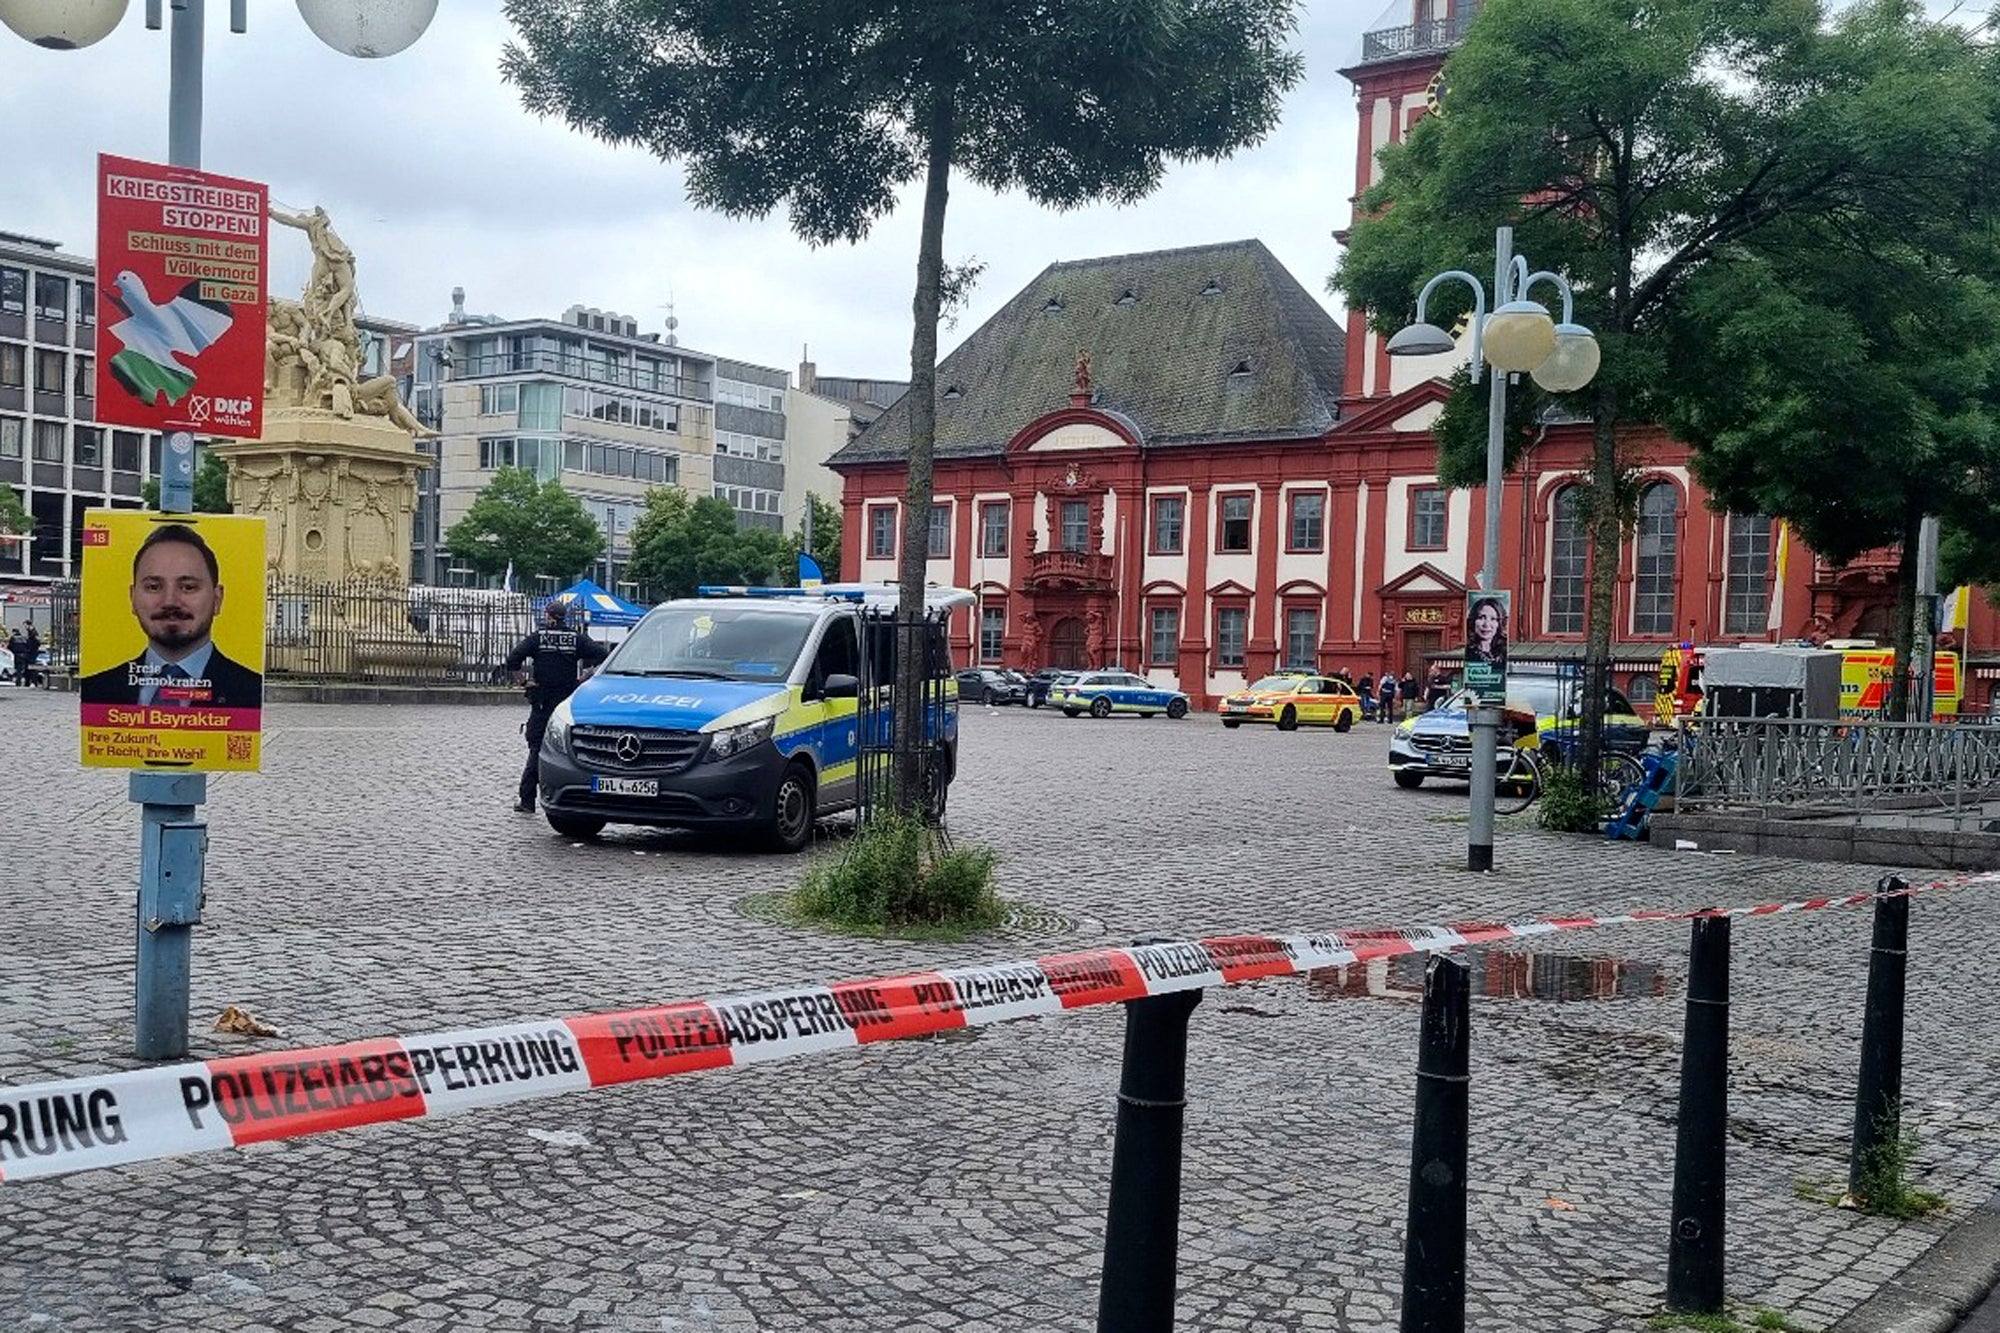 Police shot the attacker